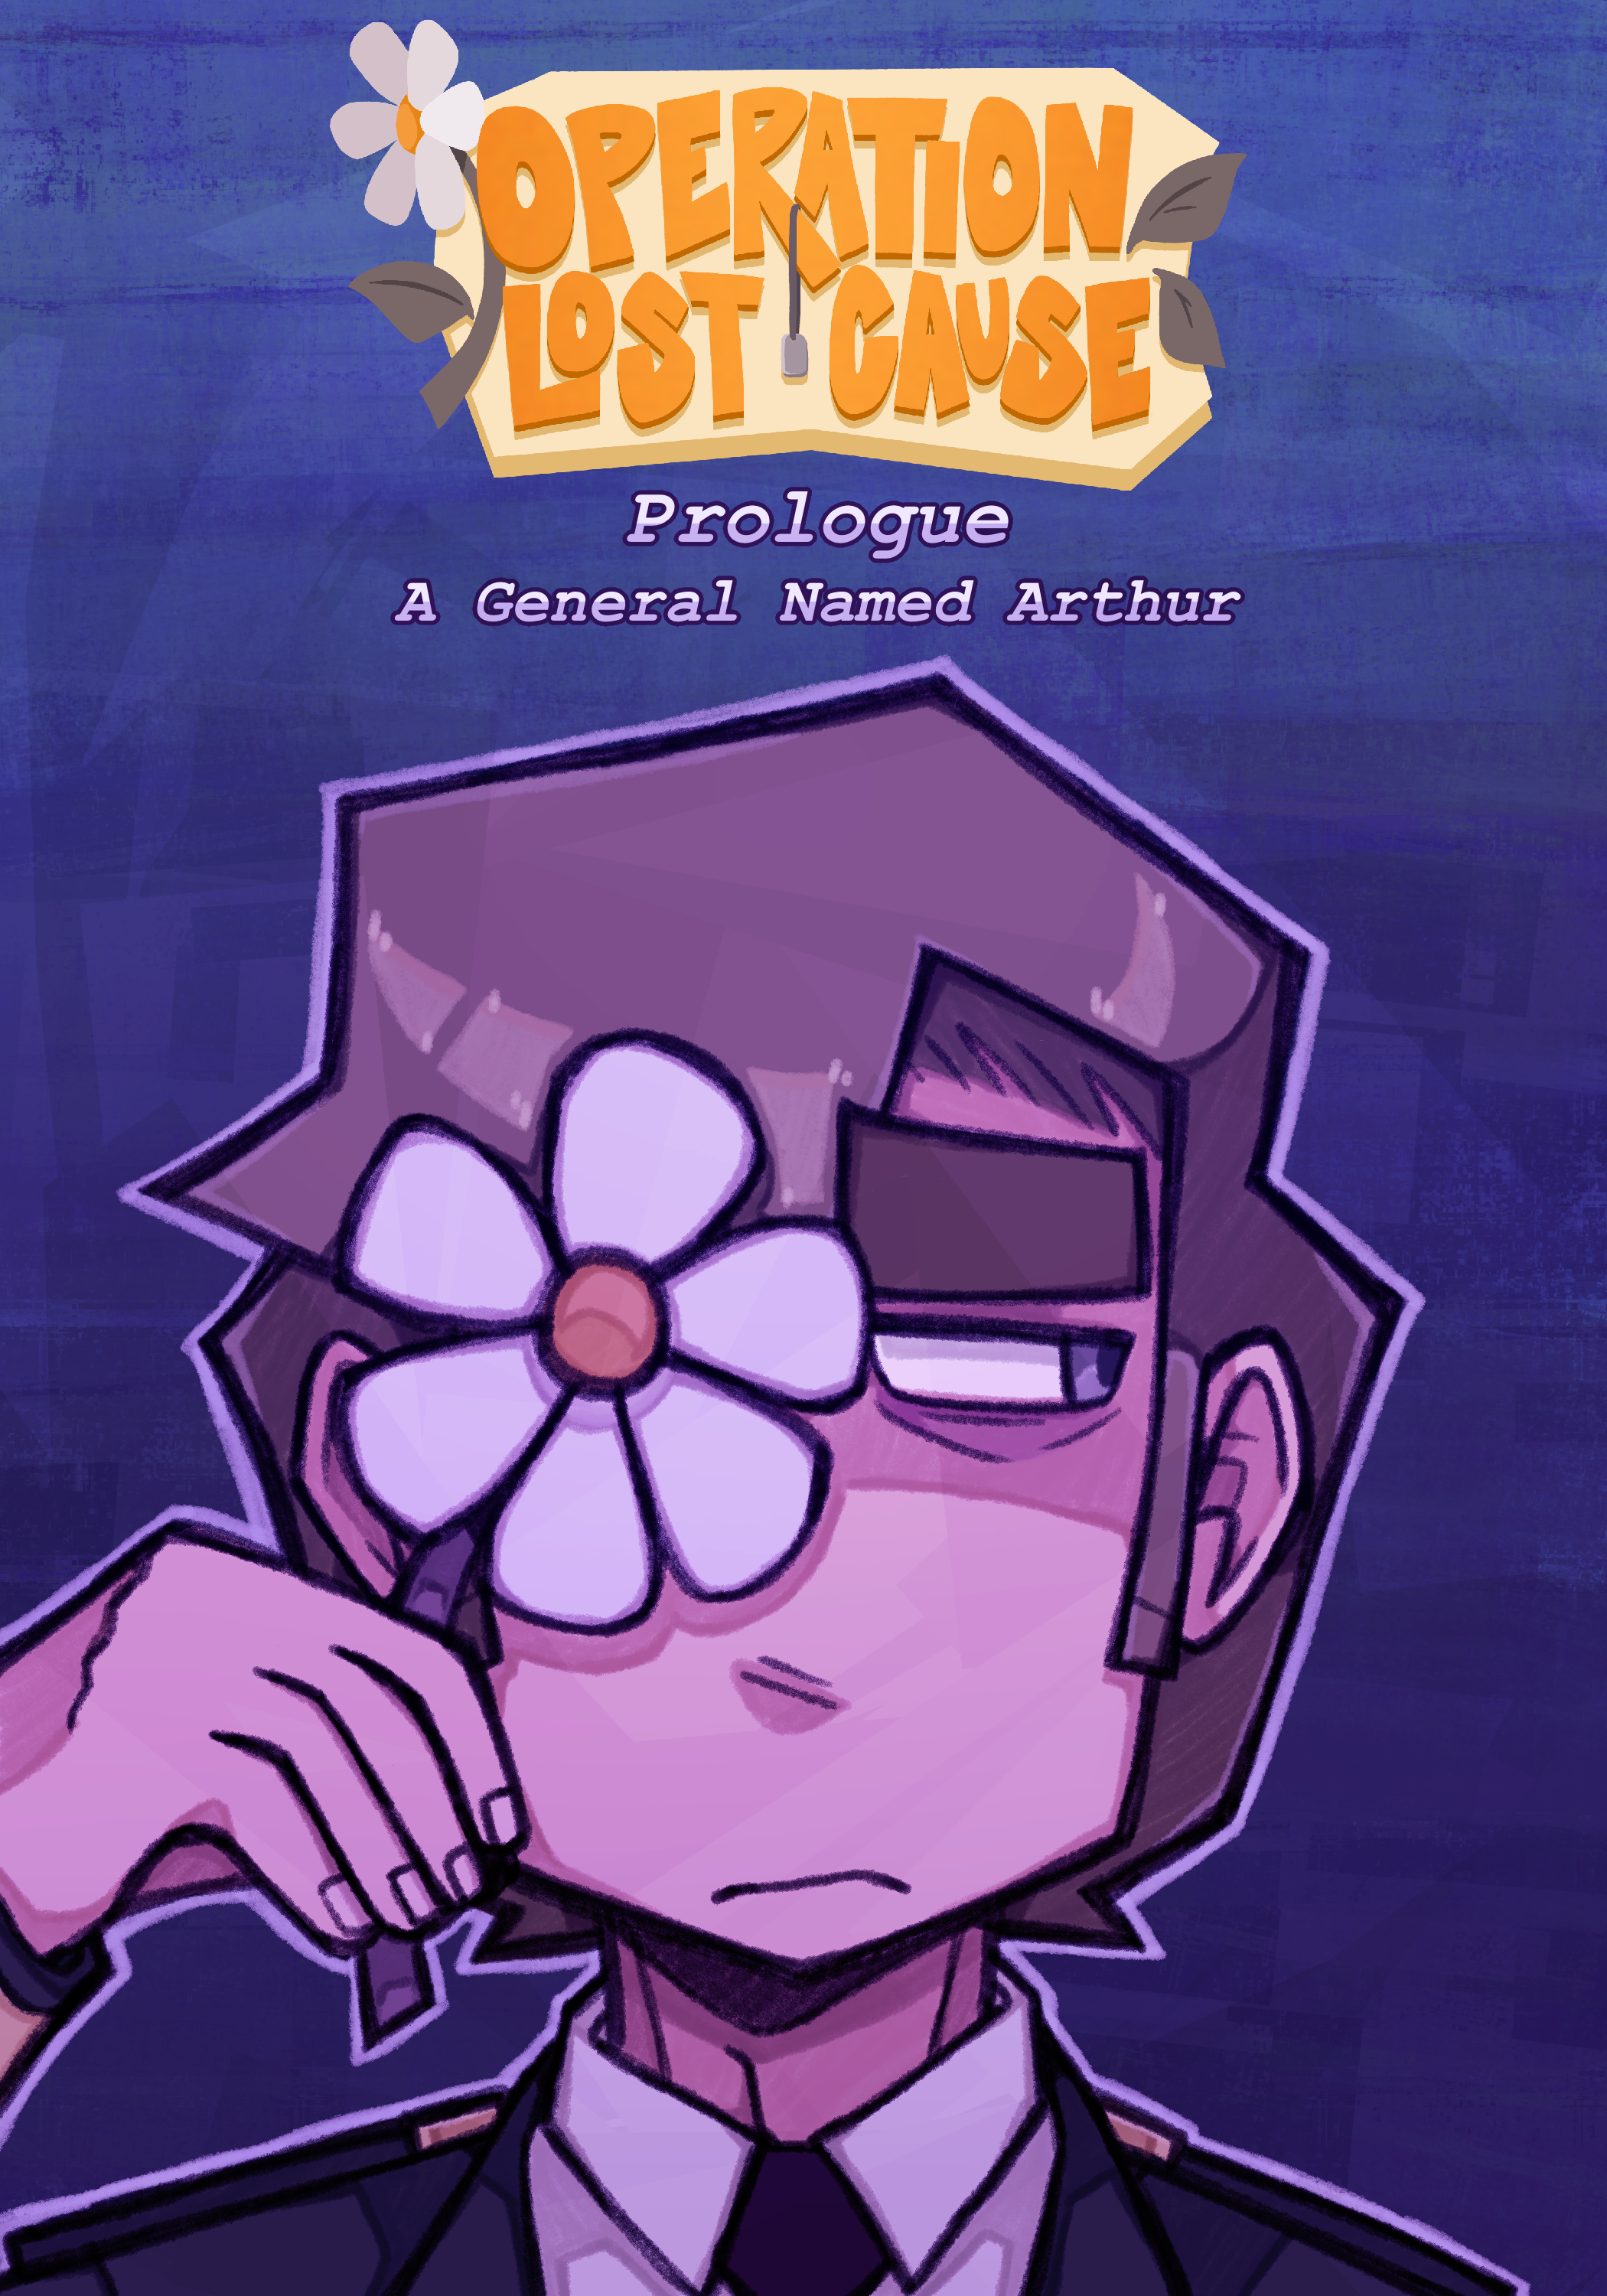 The prologue cover, featuring McCoy holding a daisy over his right eye. His opposite eye is looking off screen and his expression is sorrowful.